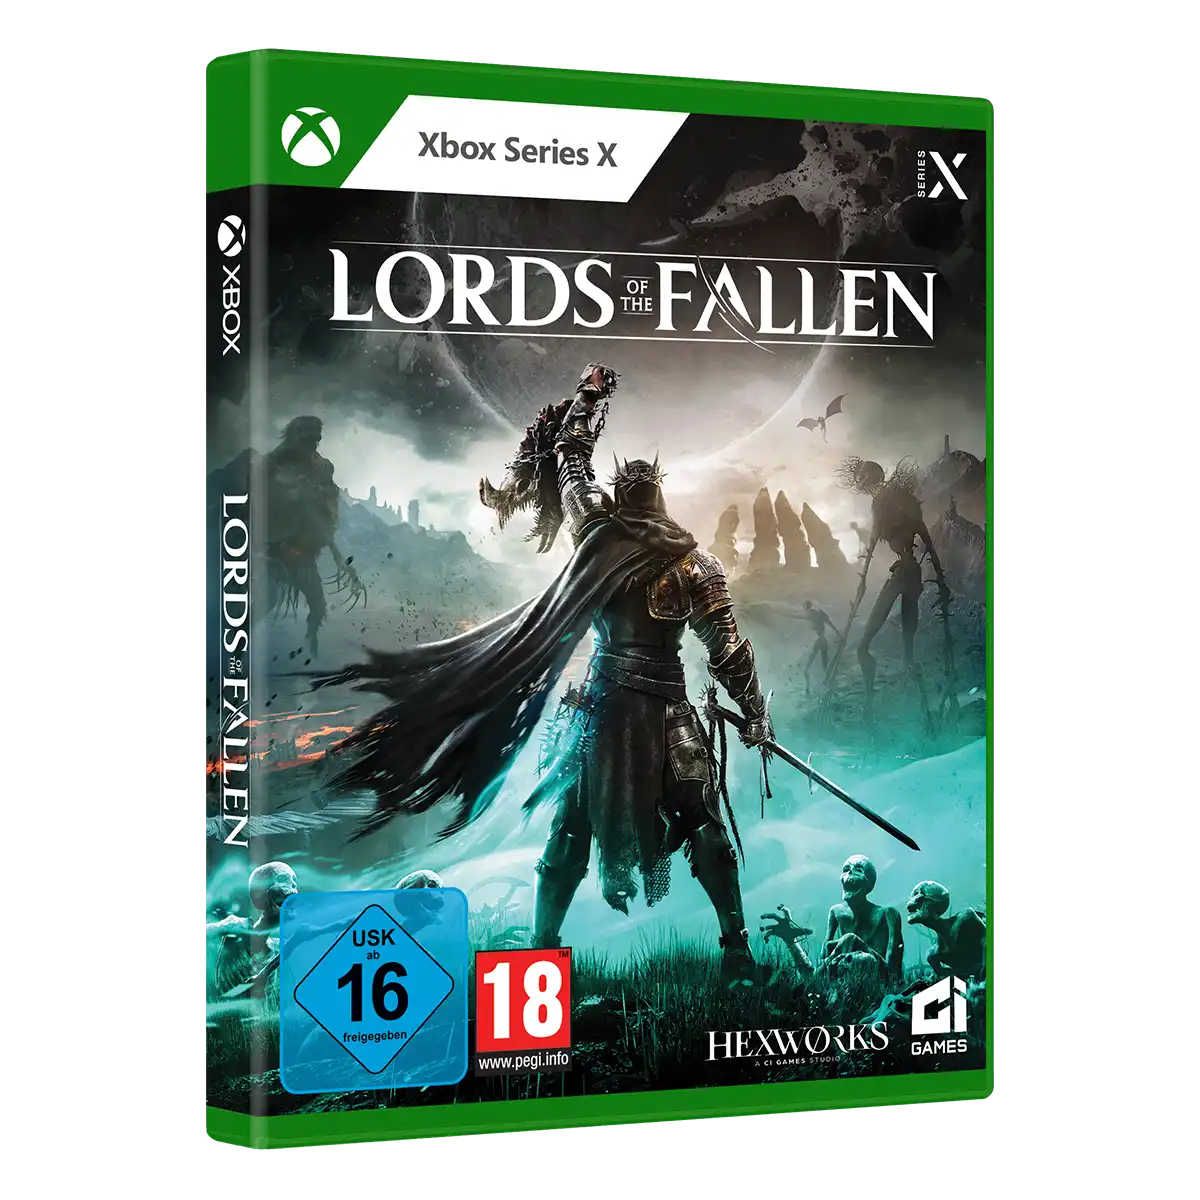 Lords of the Fallen (Xbox Series X) Image 2